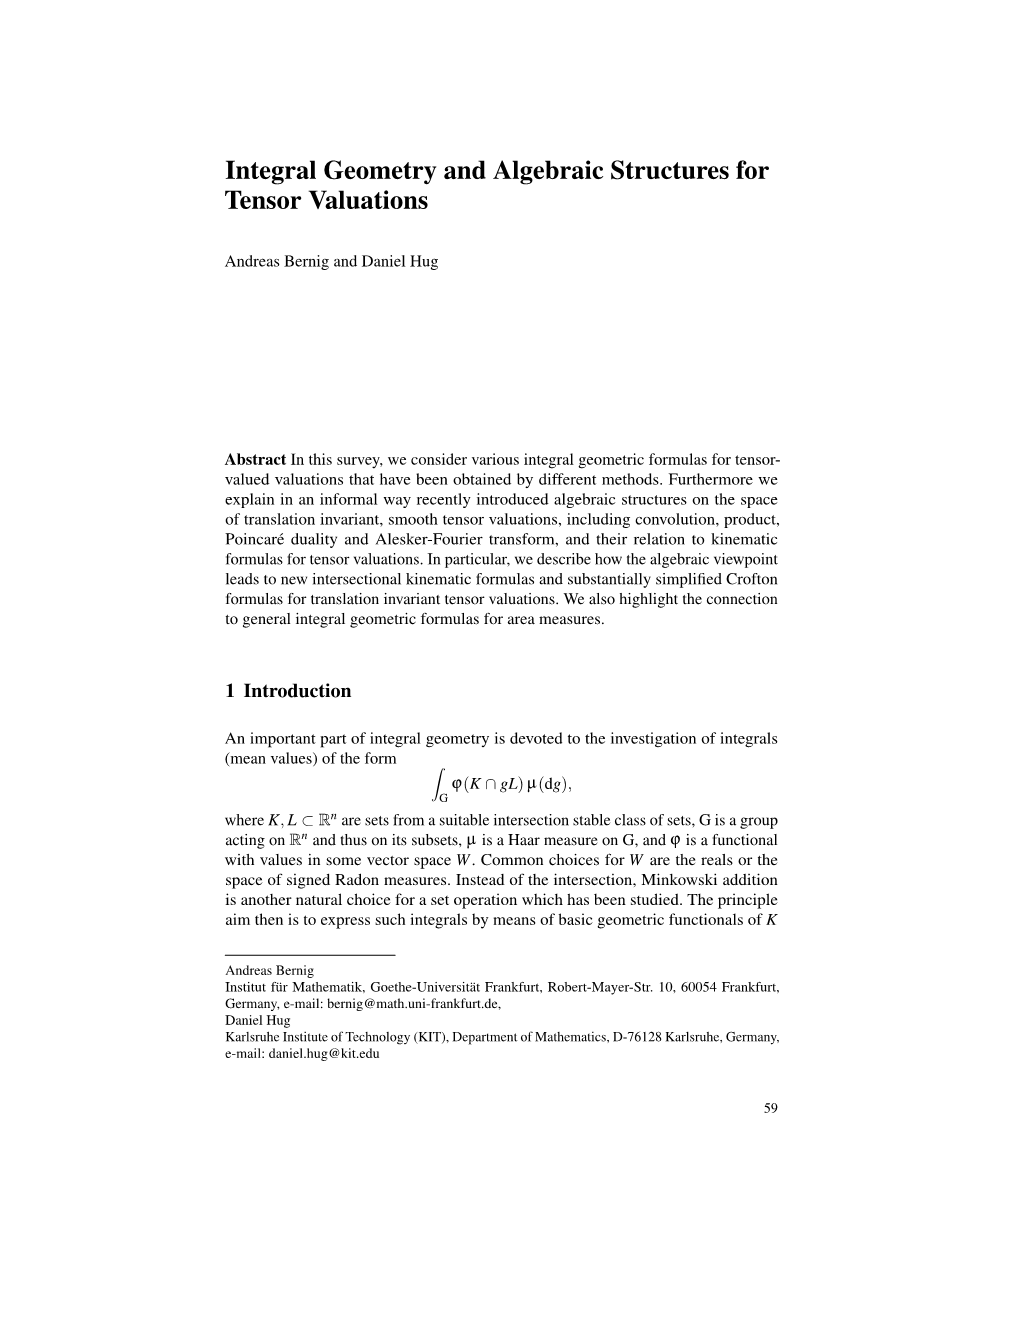 Integral Geometry and Algebraic Structures for Tensor Valuations